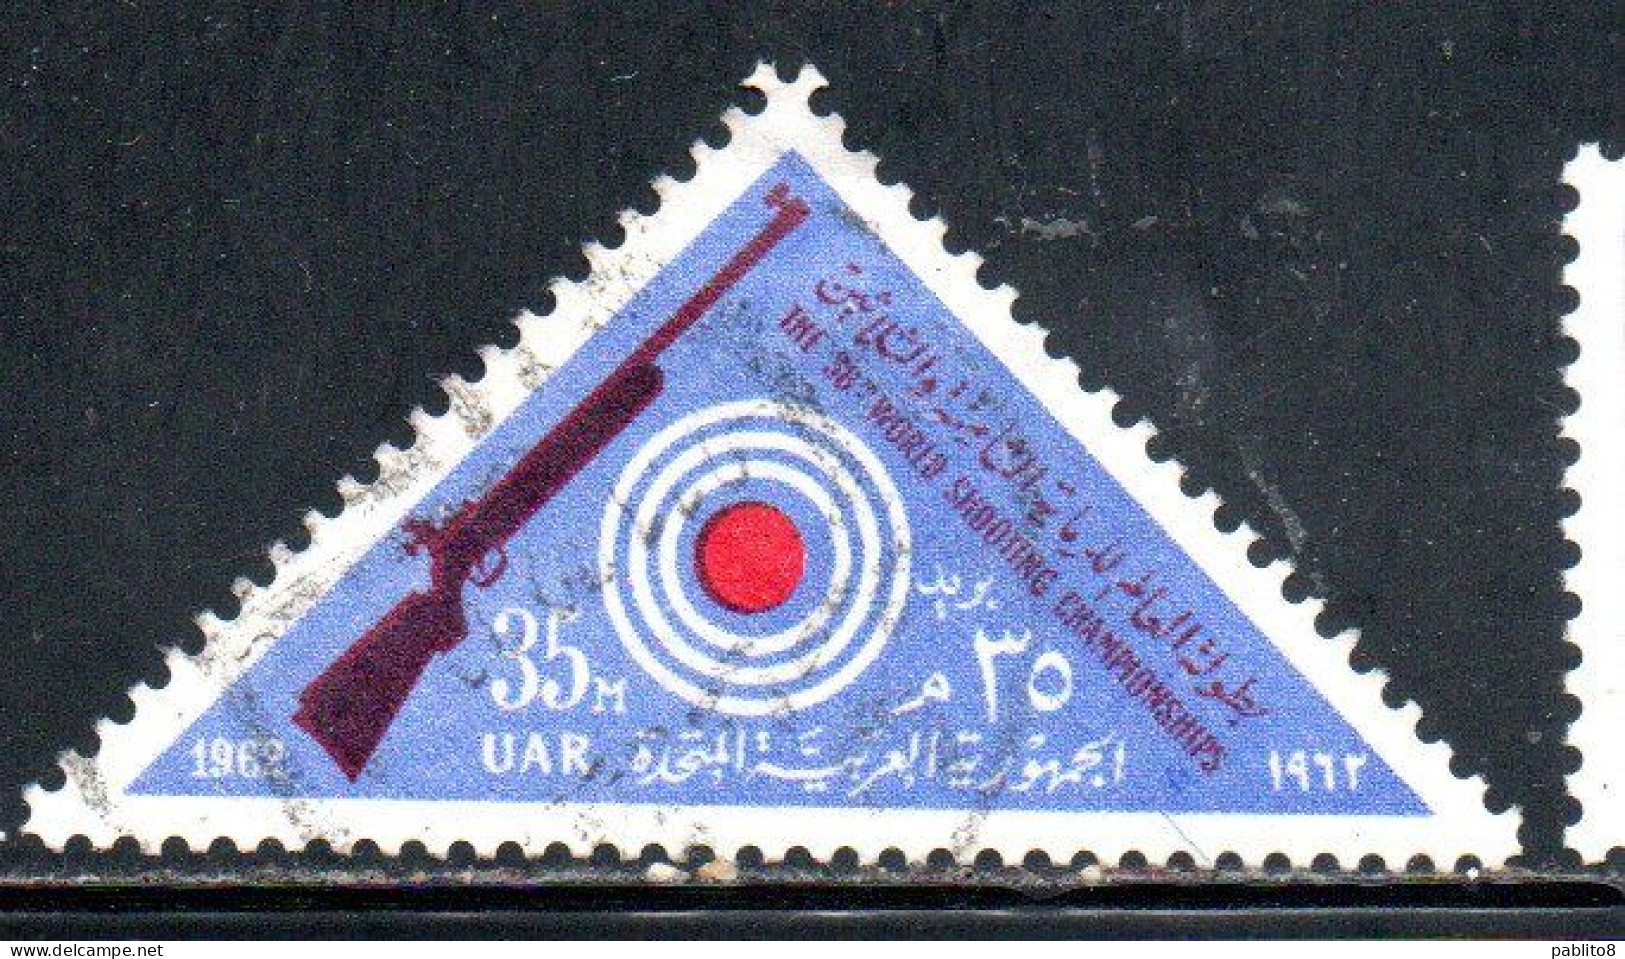 UAR EGYPT EGITTO 1962 WORLD SHOOTING CHAMPIONSHIPS AND AFRICAN TABLE TENNIS TOURNAMENTE RIFLE AND TARGET 35m USED USATO - Gebraucht